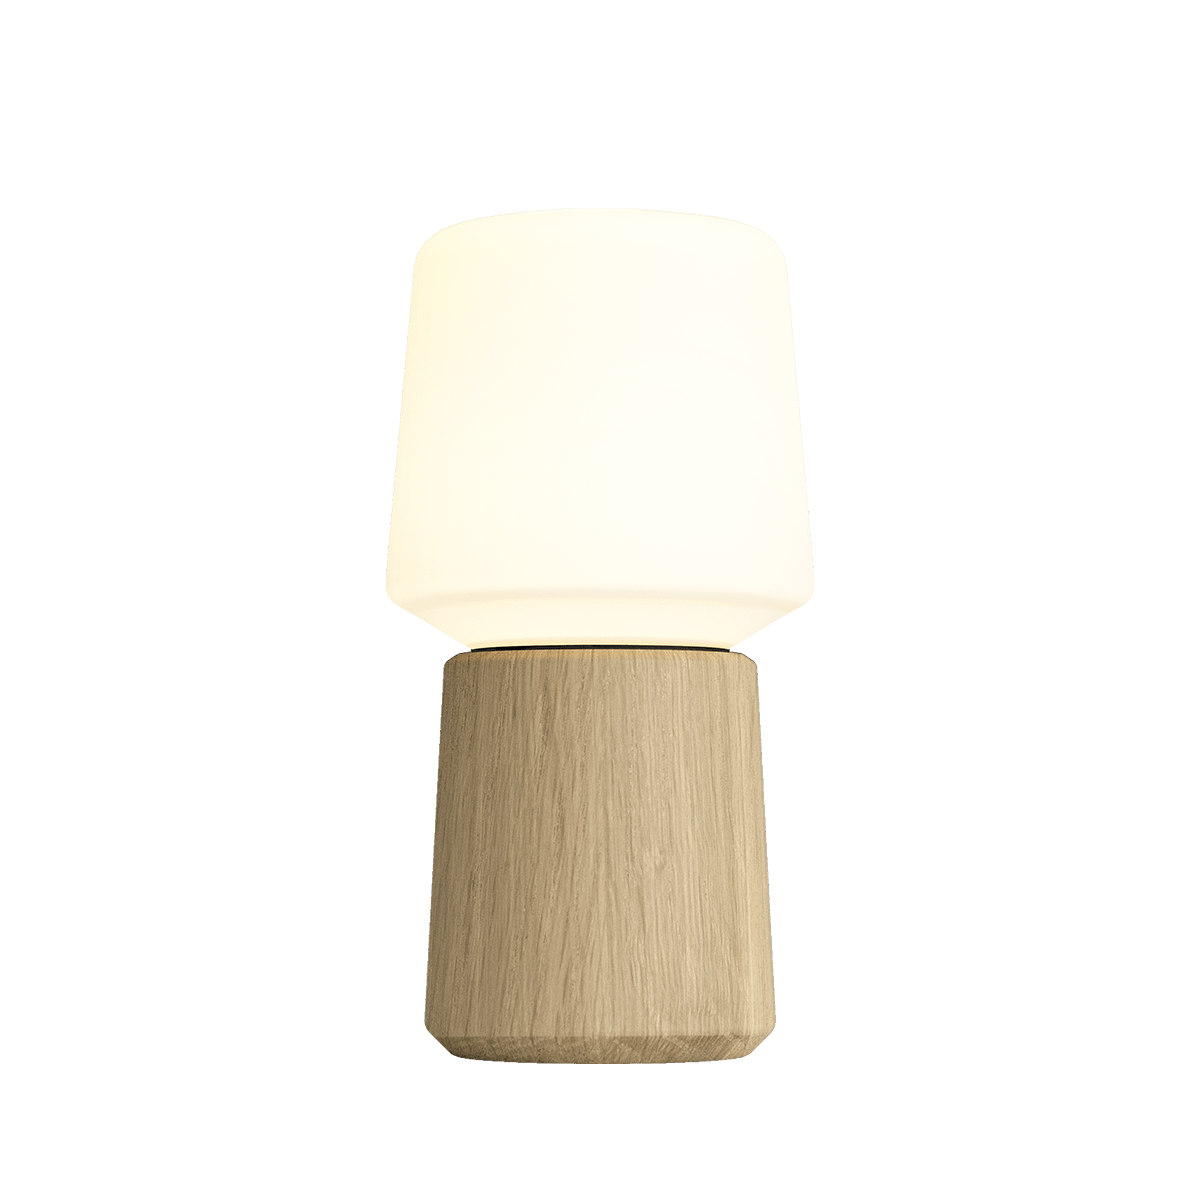 variant_600230% | Ambience - Lamp Intelligent + Oslo base [Contract] - Natural Oak 8 | SACKit